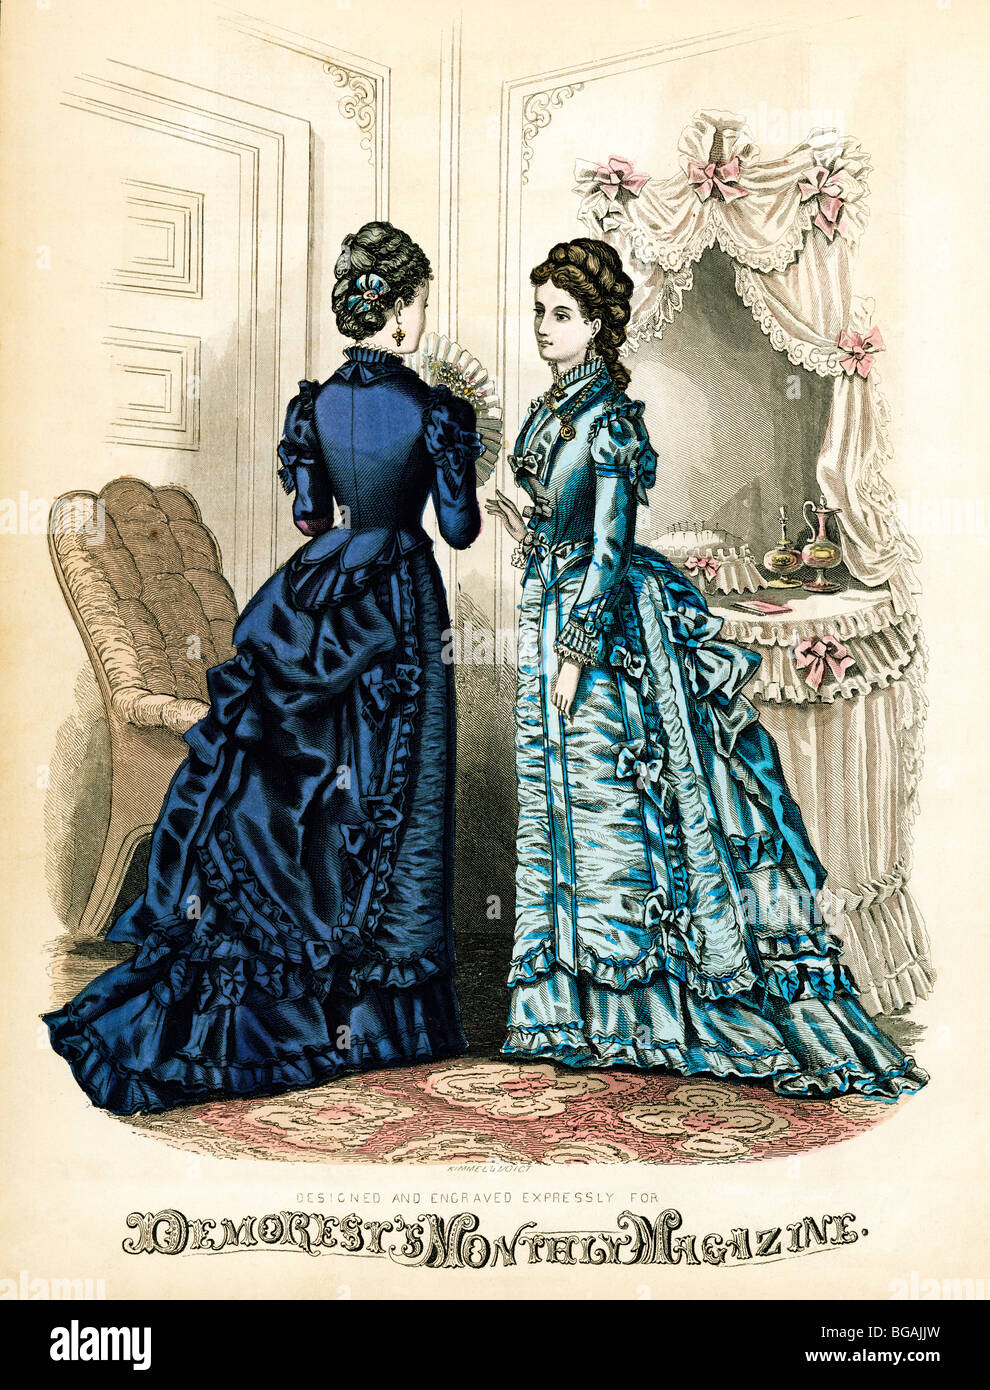 Demorests, January 1875, engraving from the American monthly ladies fashion magazine famous for dressmaking patterns Stock Photo